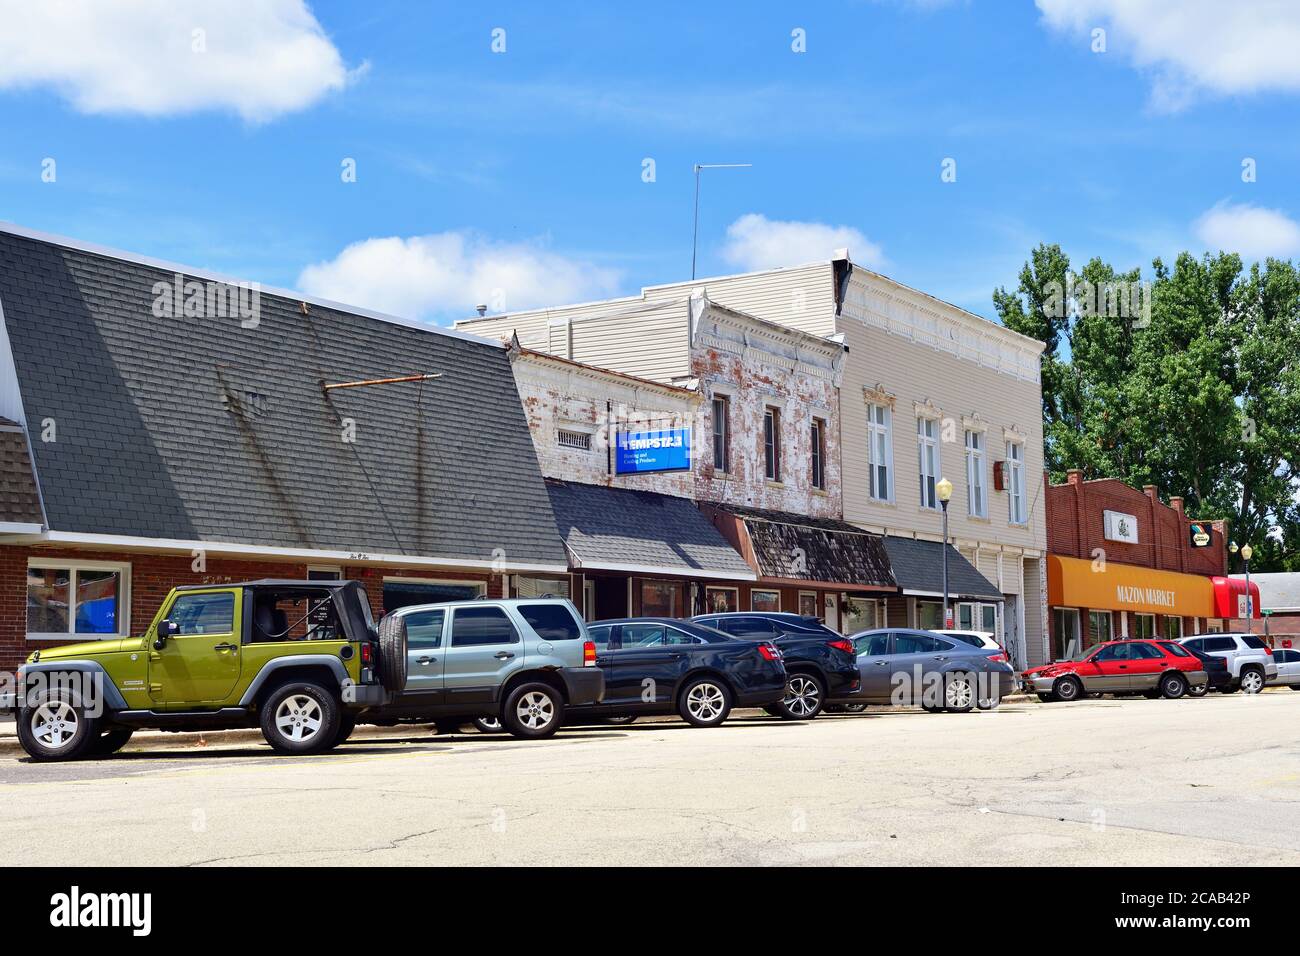 Mazon, Illinois, USA. Main Street in a small Midwestern United States town. The scene is typical of many small communities throughout Illinois. Stock Photo